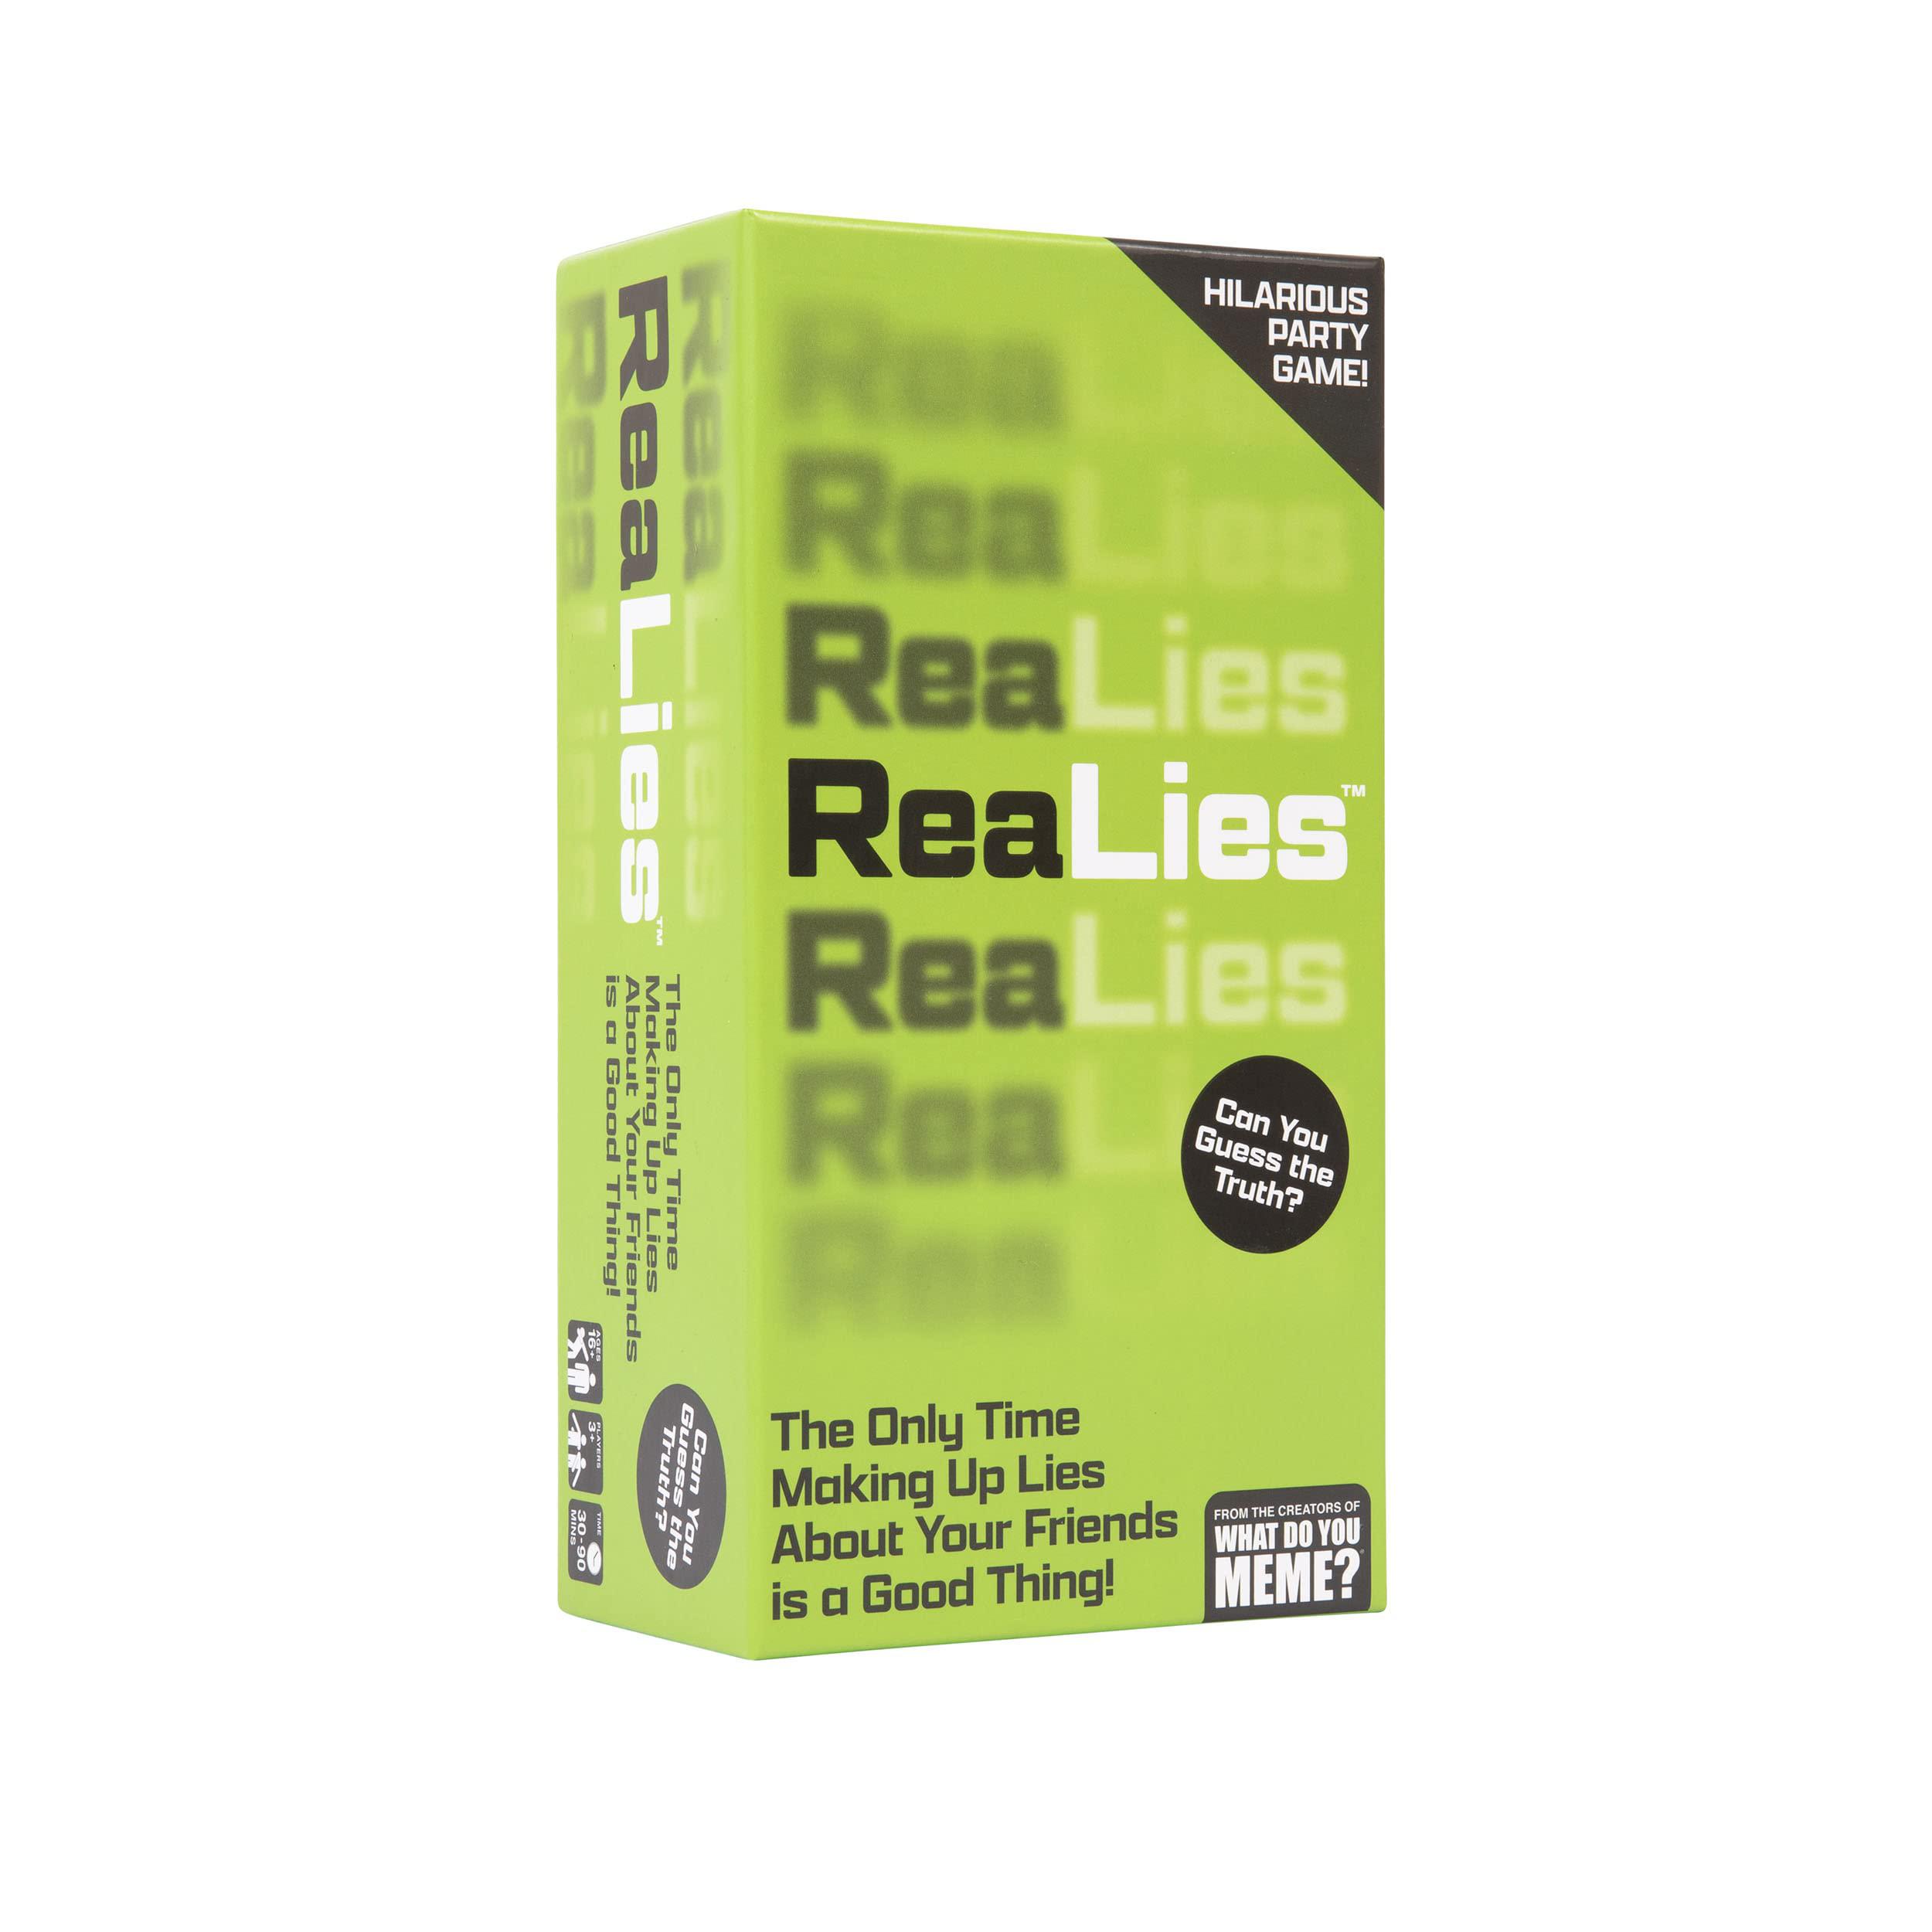 What Do You Meme? realies - the hilarious party game of truths and lies that tests how well you know your friends - by what do you meme?